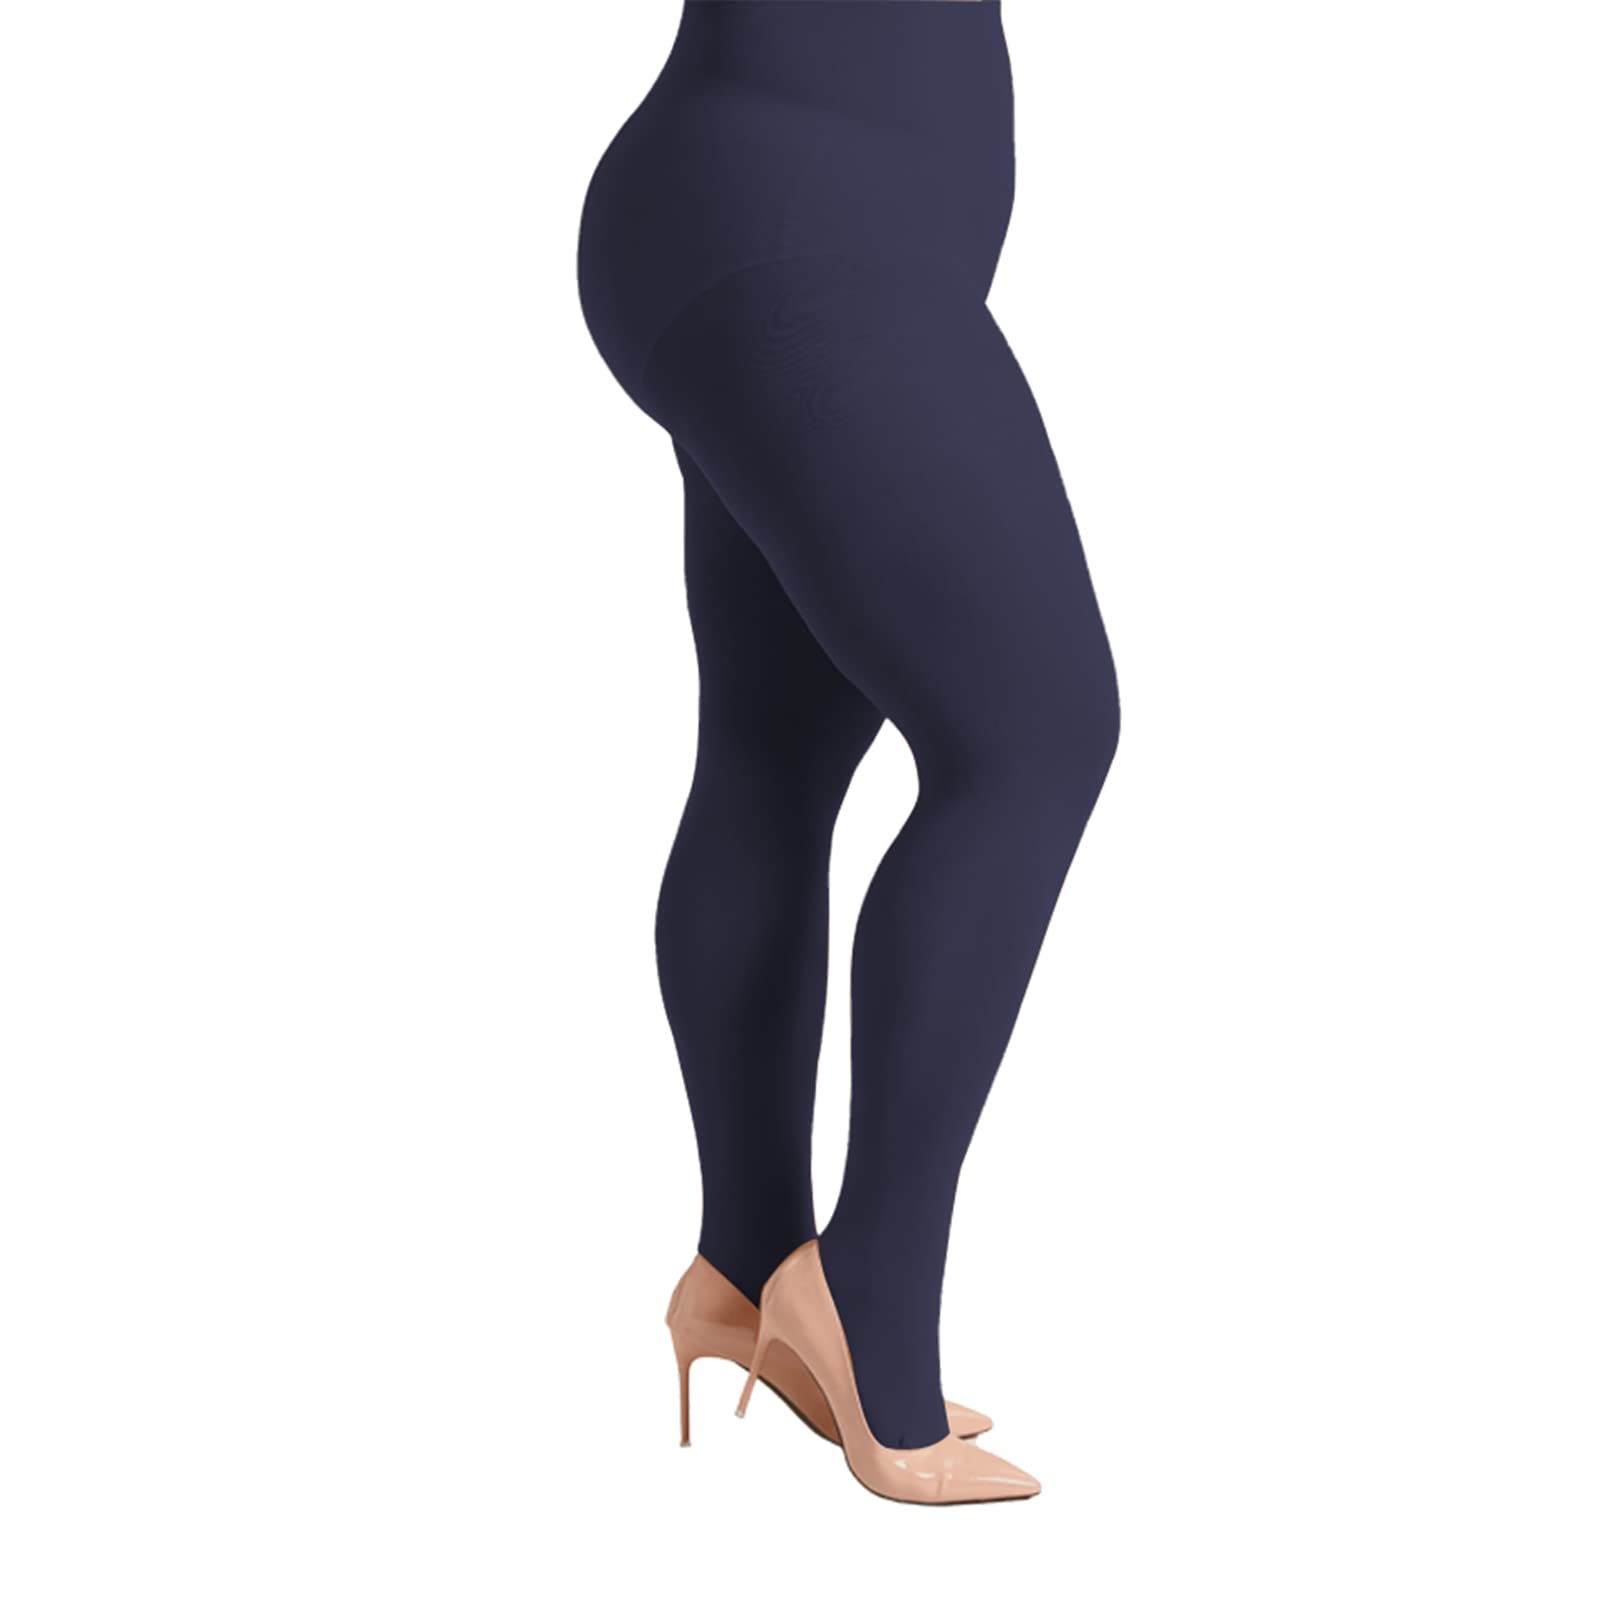 MANZI 2 Pack Plus Size Tights for Women 70D Queen Size Tights - Walmart.com